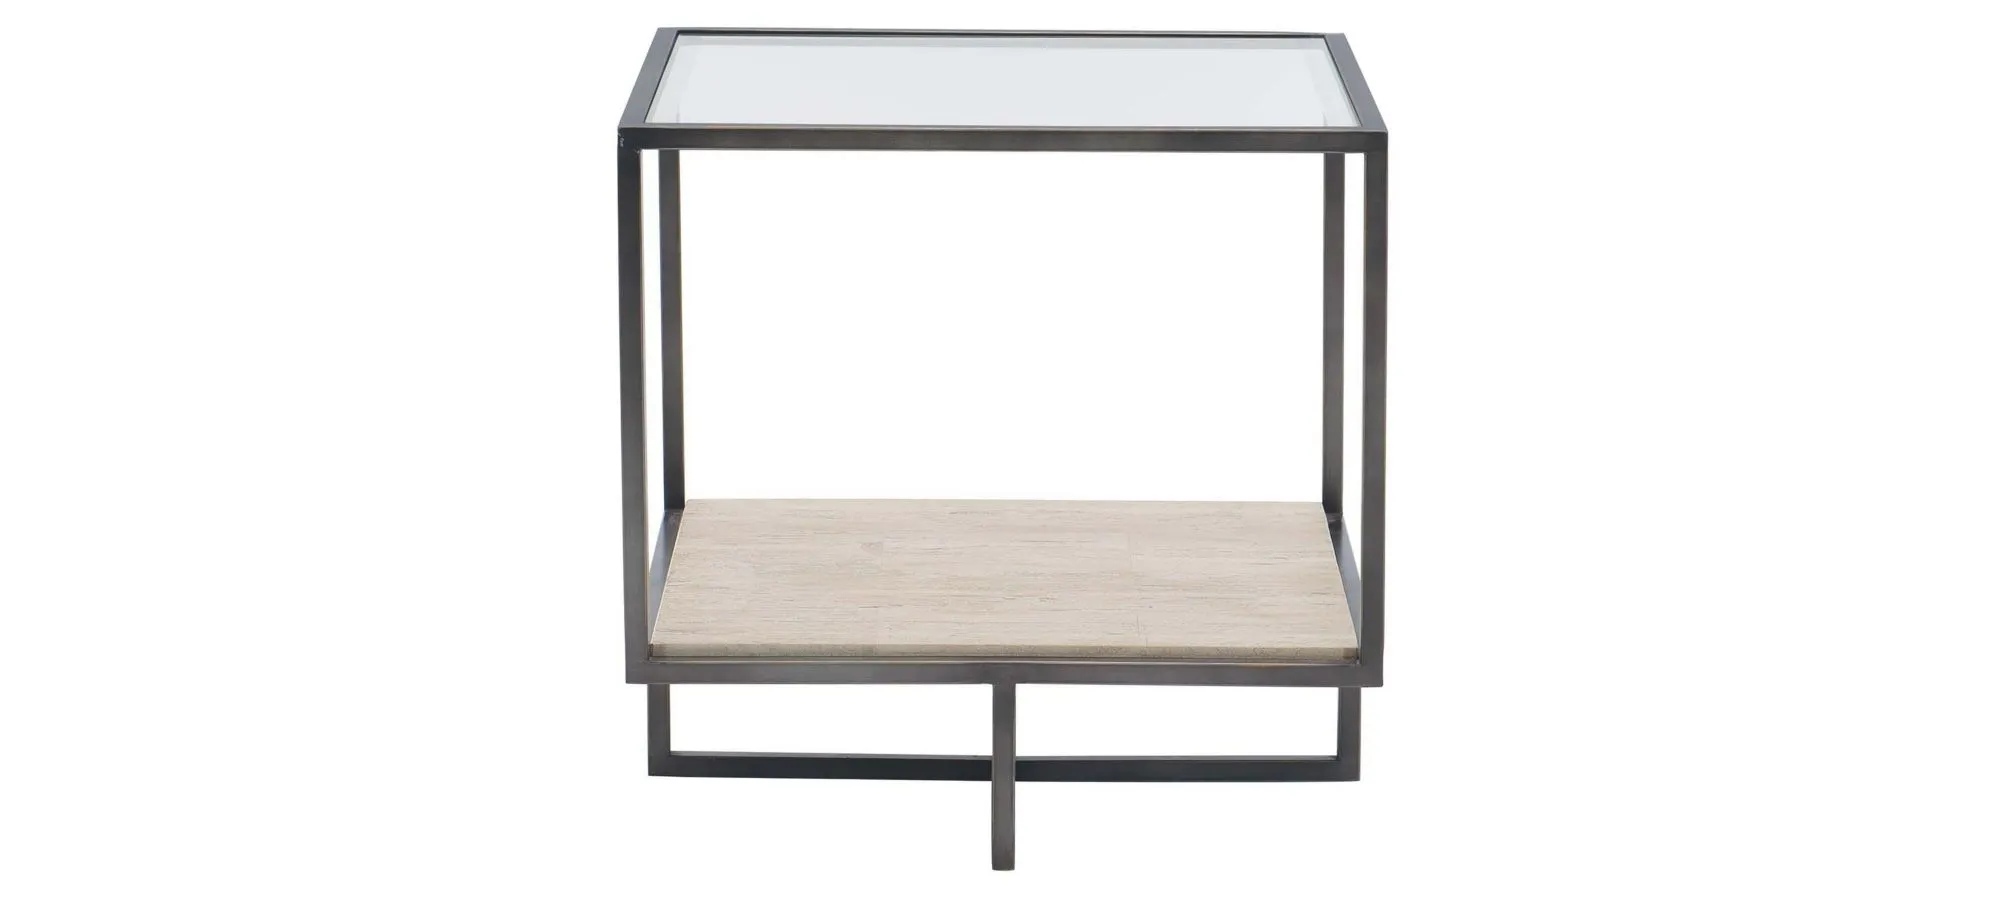 Harlow Square End Table in White Travertine by Bernhardt